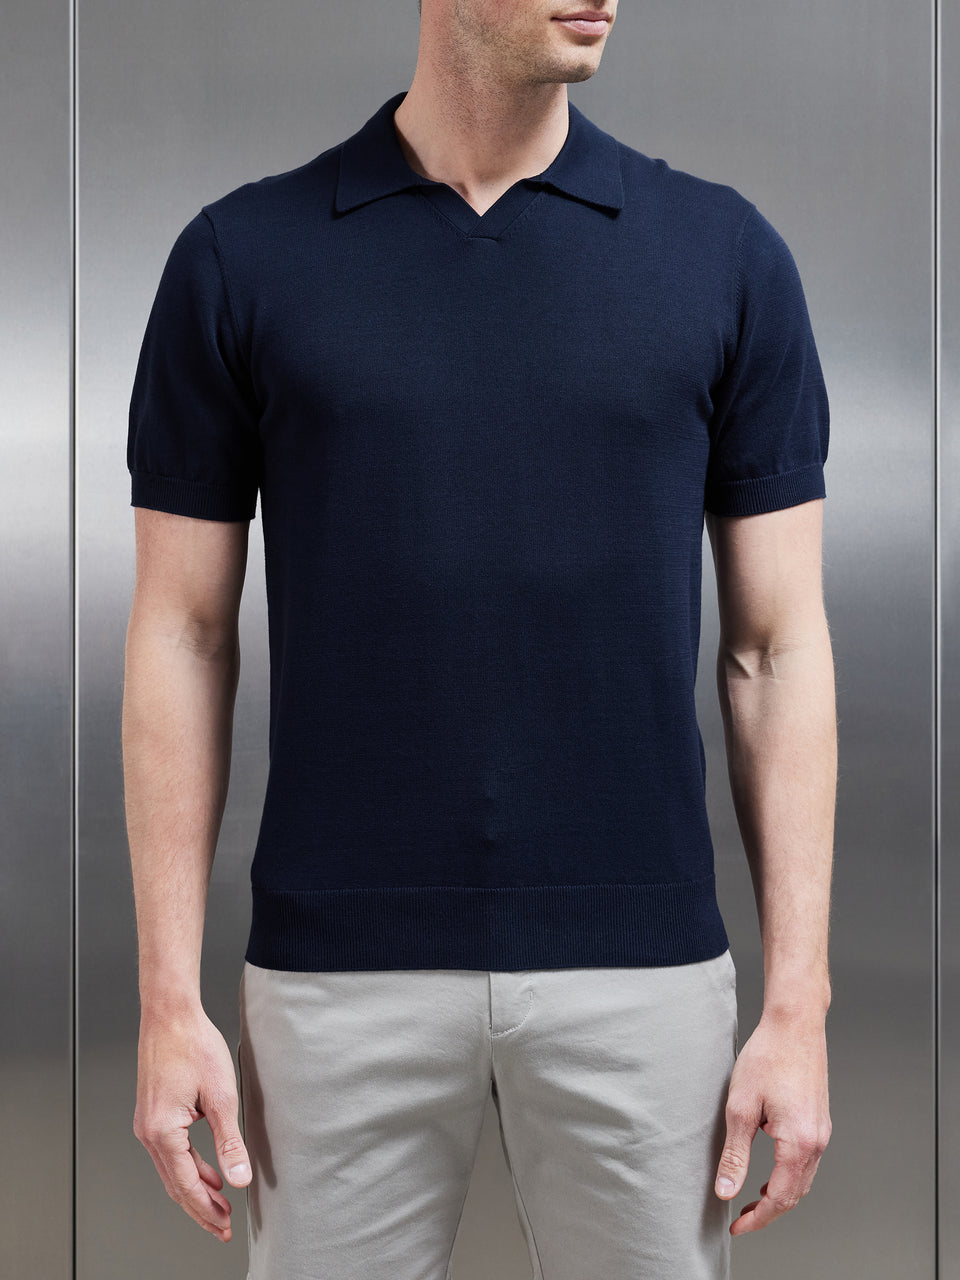 Cotton Knitted Revere Collar Polo Shirt in Navy